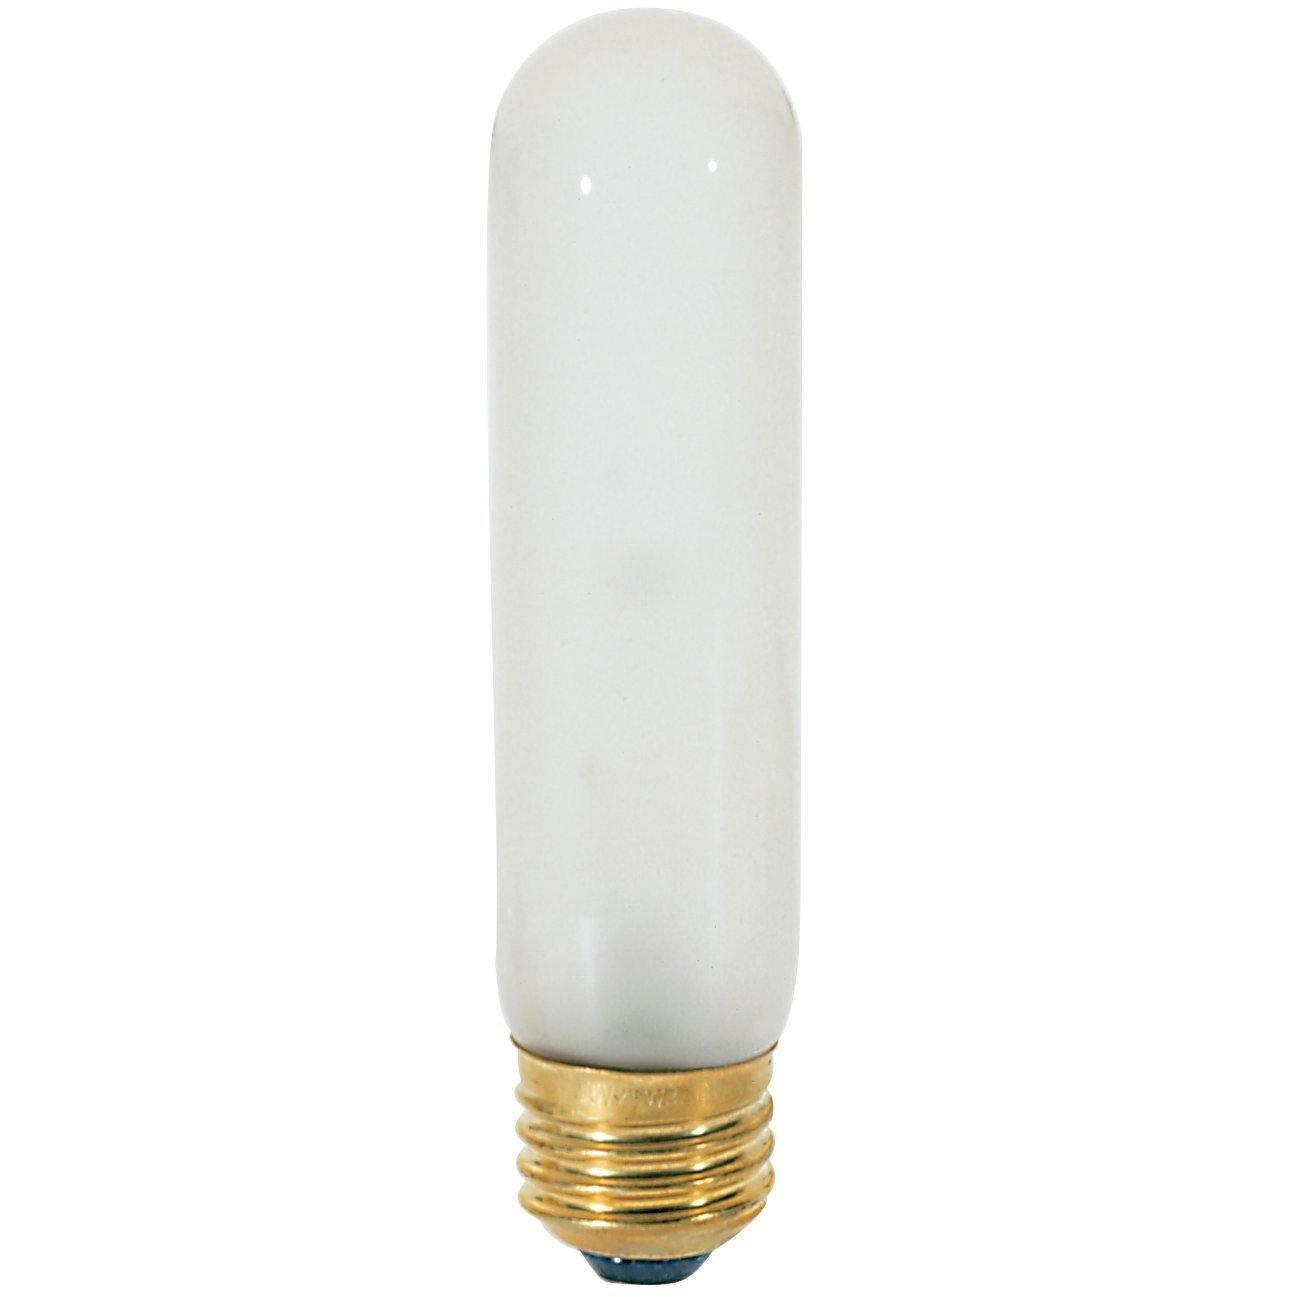 Satco Products - 40 Watt T10 Incandescent, Frost, 2000 Average rated hours, 280 Lumens, Medium base, 120 Volt - S3253 | Montreal Lighting & Hardware